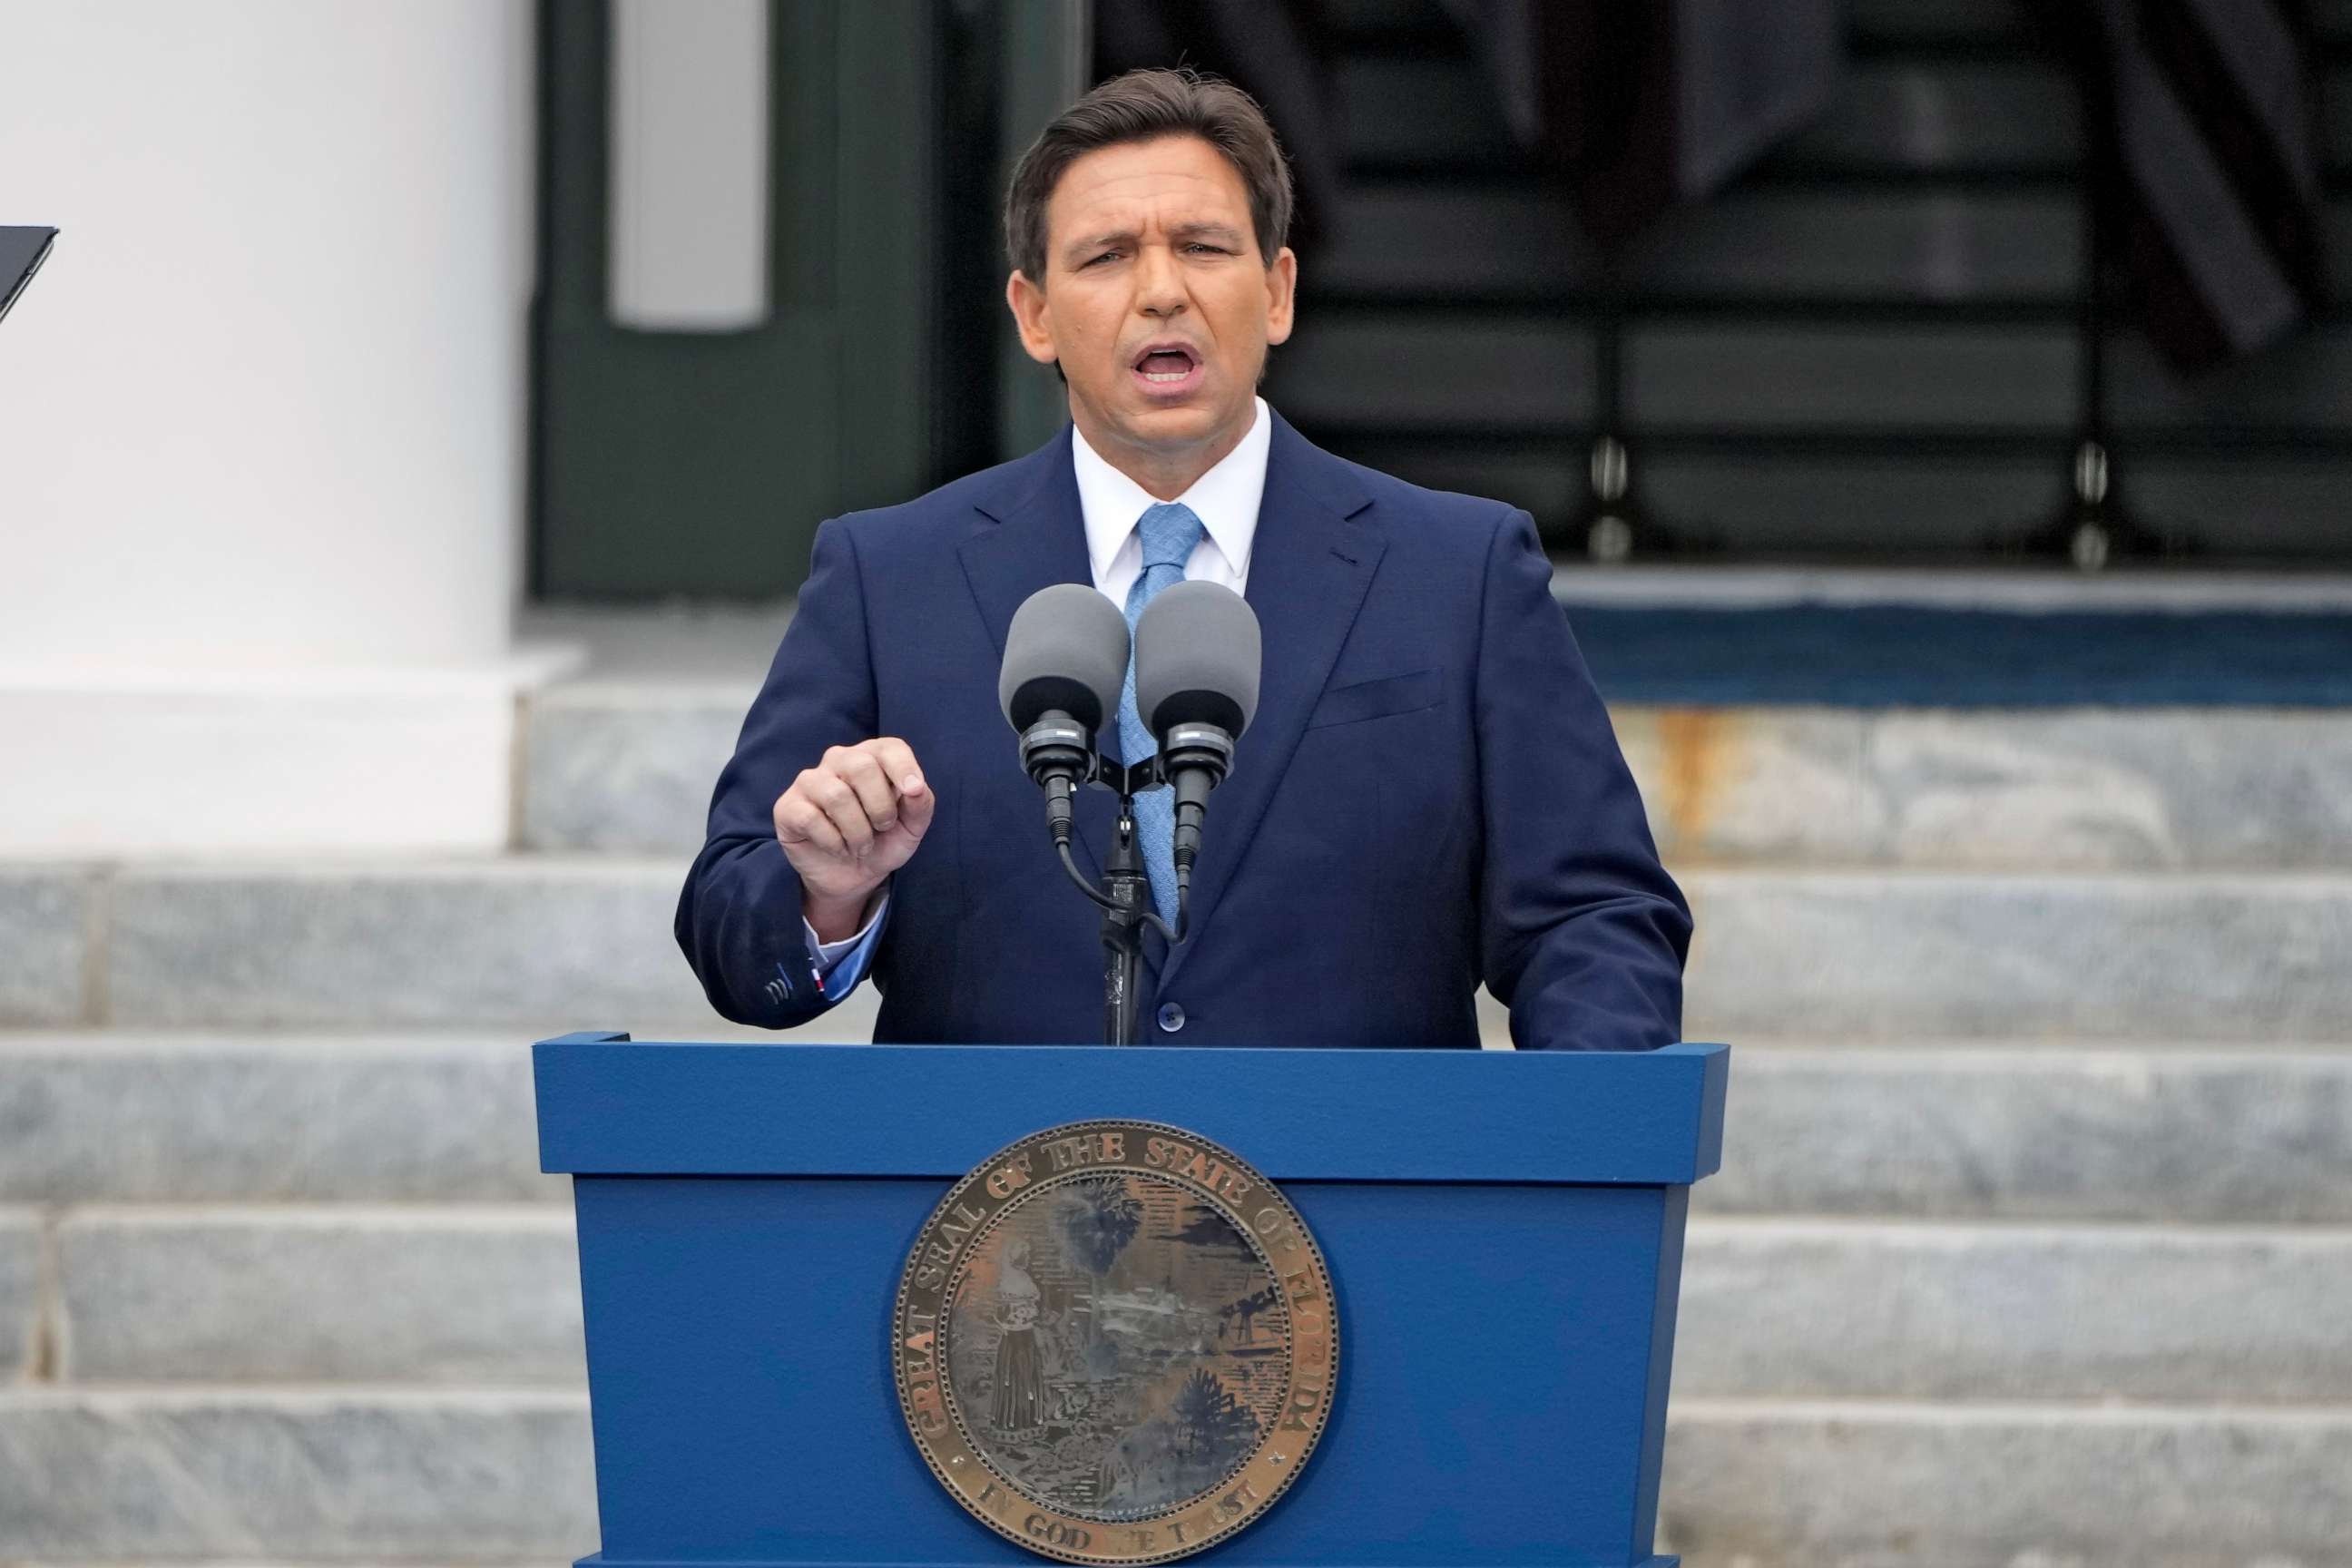 PHOTO: Florida Gov. Ron DeSantis speaks to the crowd after being sworn in to begin his second term during an inauguration ceremony outside the Old Capitol on Jan. 3, 2023, in Tallahassee, Fla.